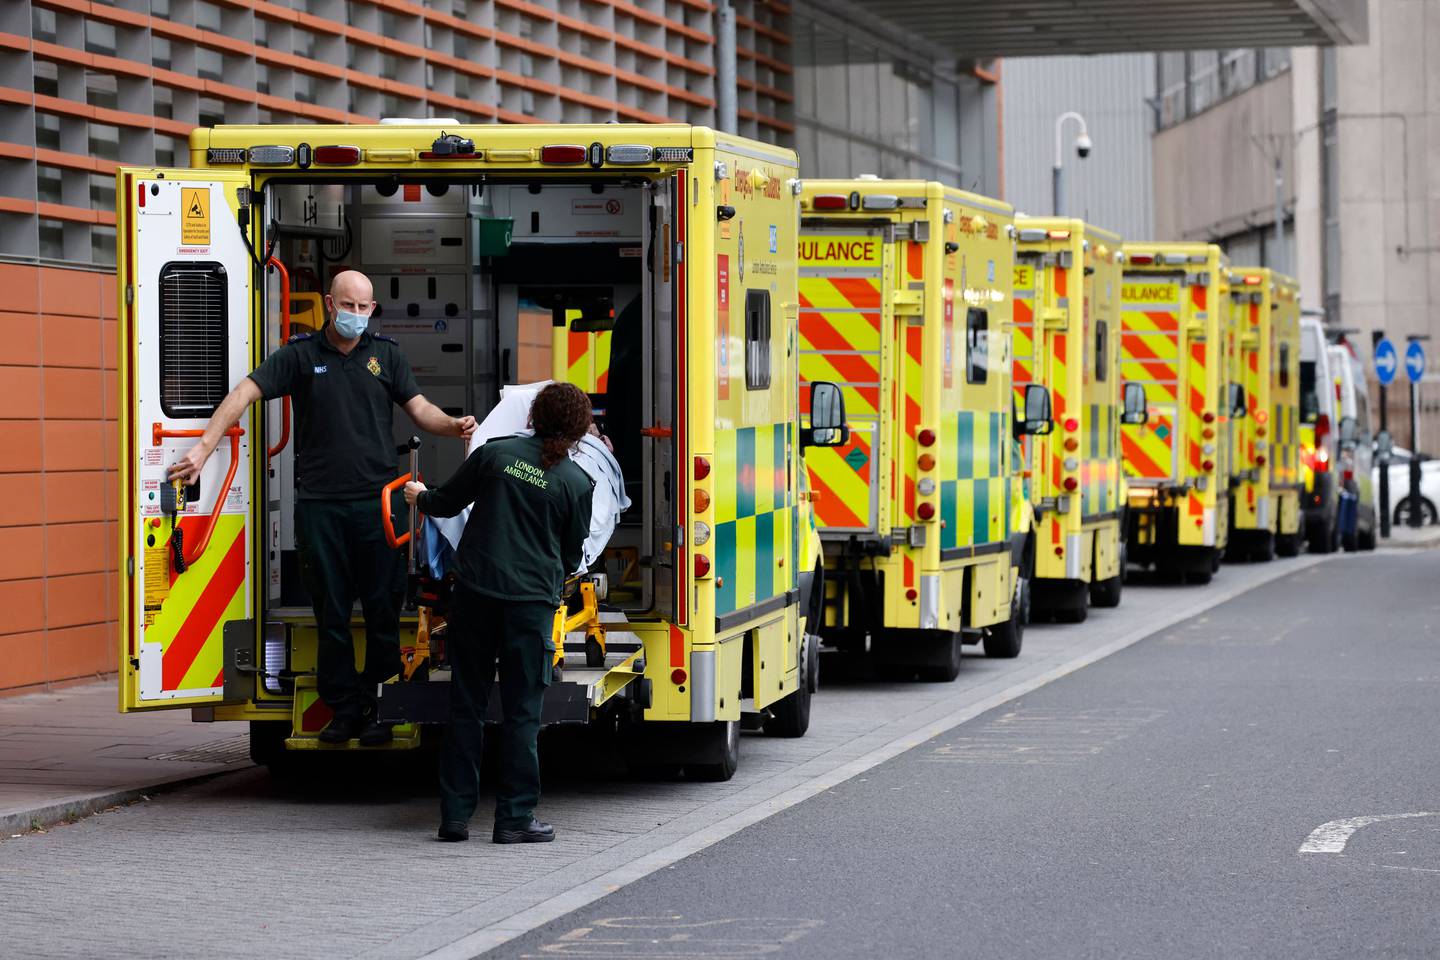 Paramedics unload a patient from an ambulance outside the Royal London hospital. AFP